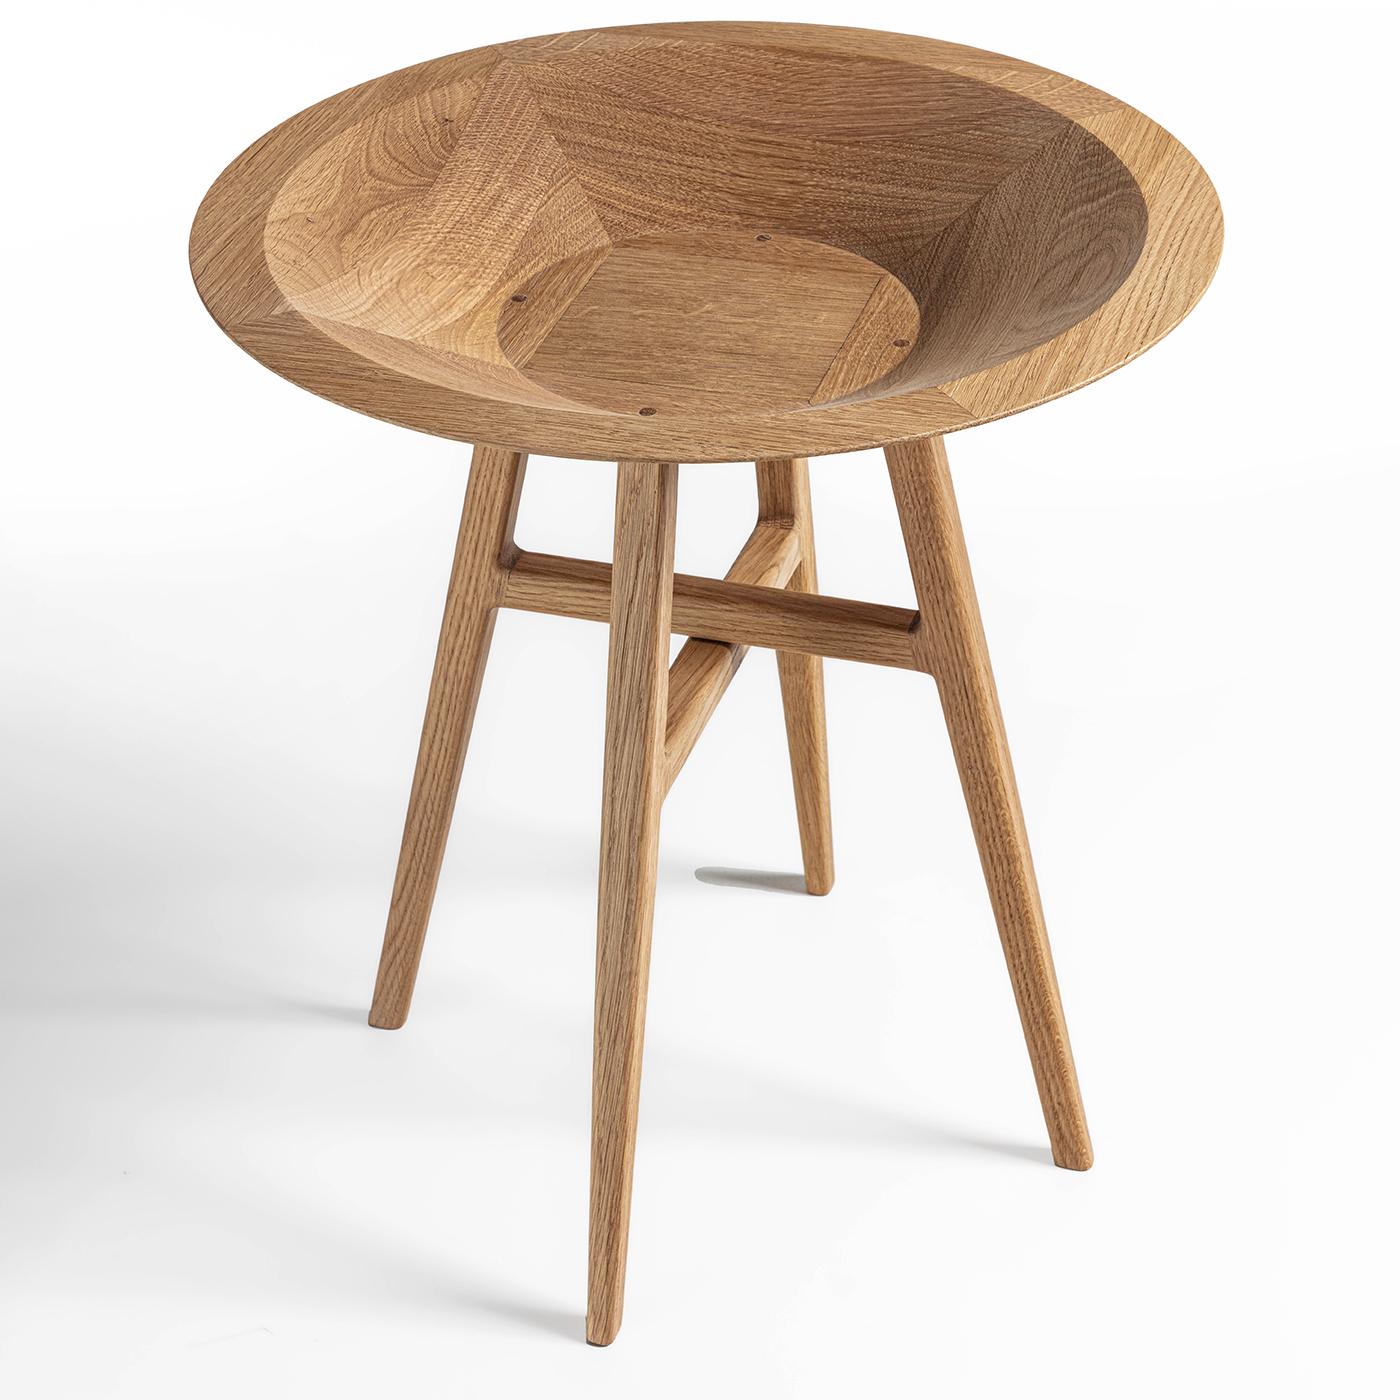 Italian Joker Round Brown Accent Table For Sale